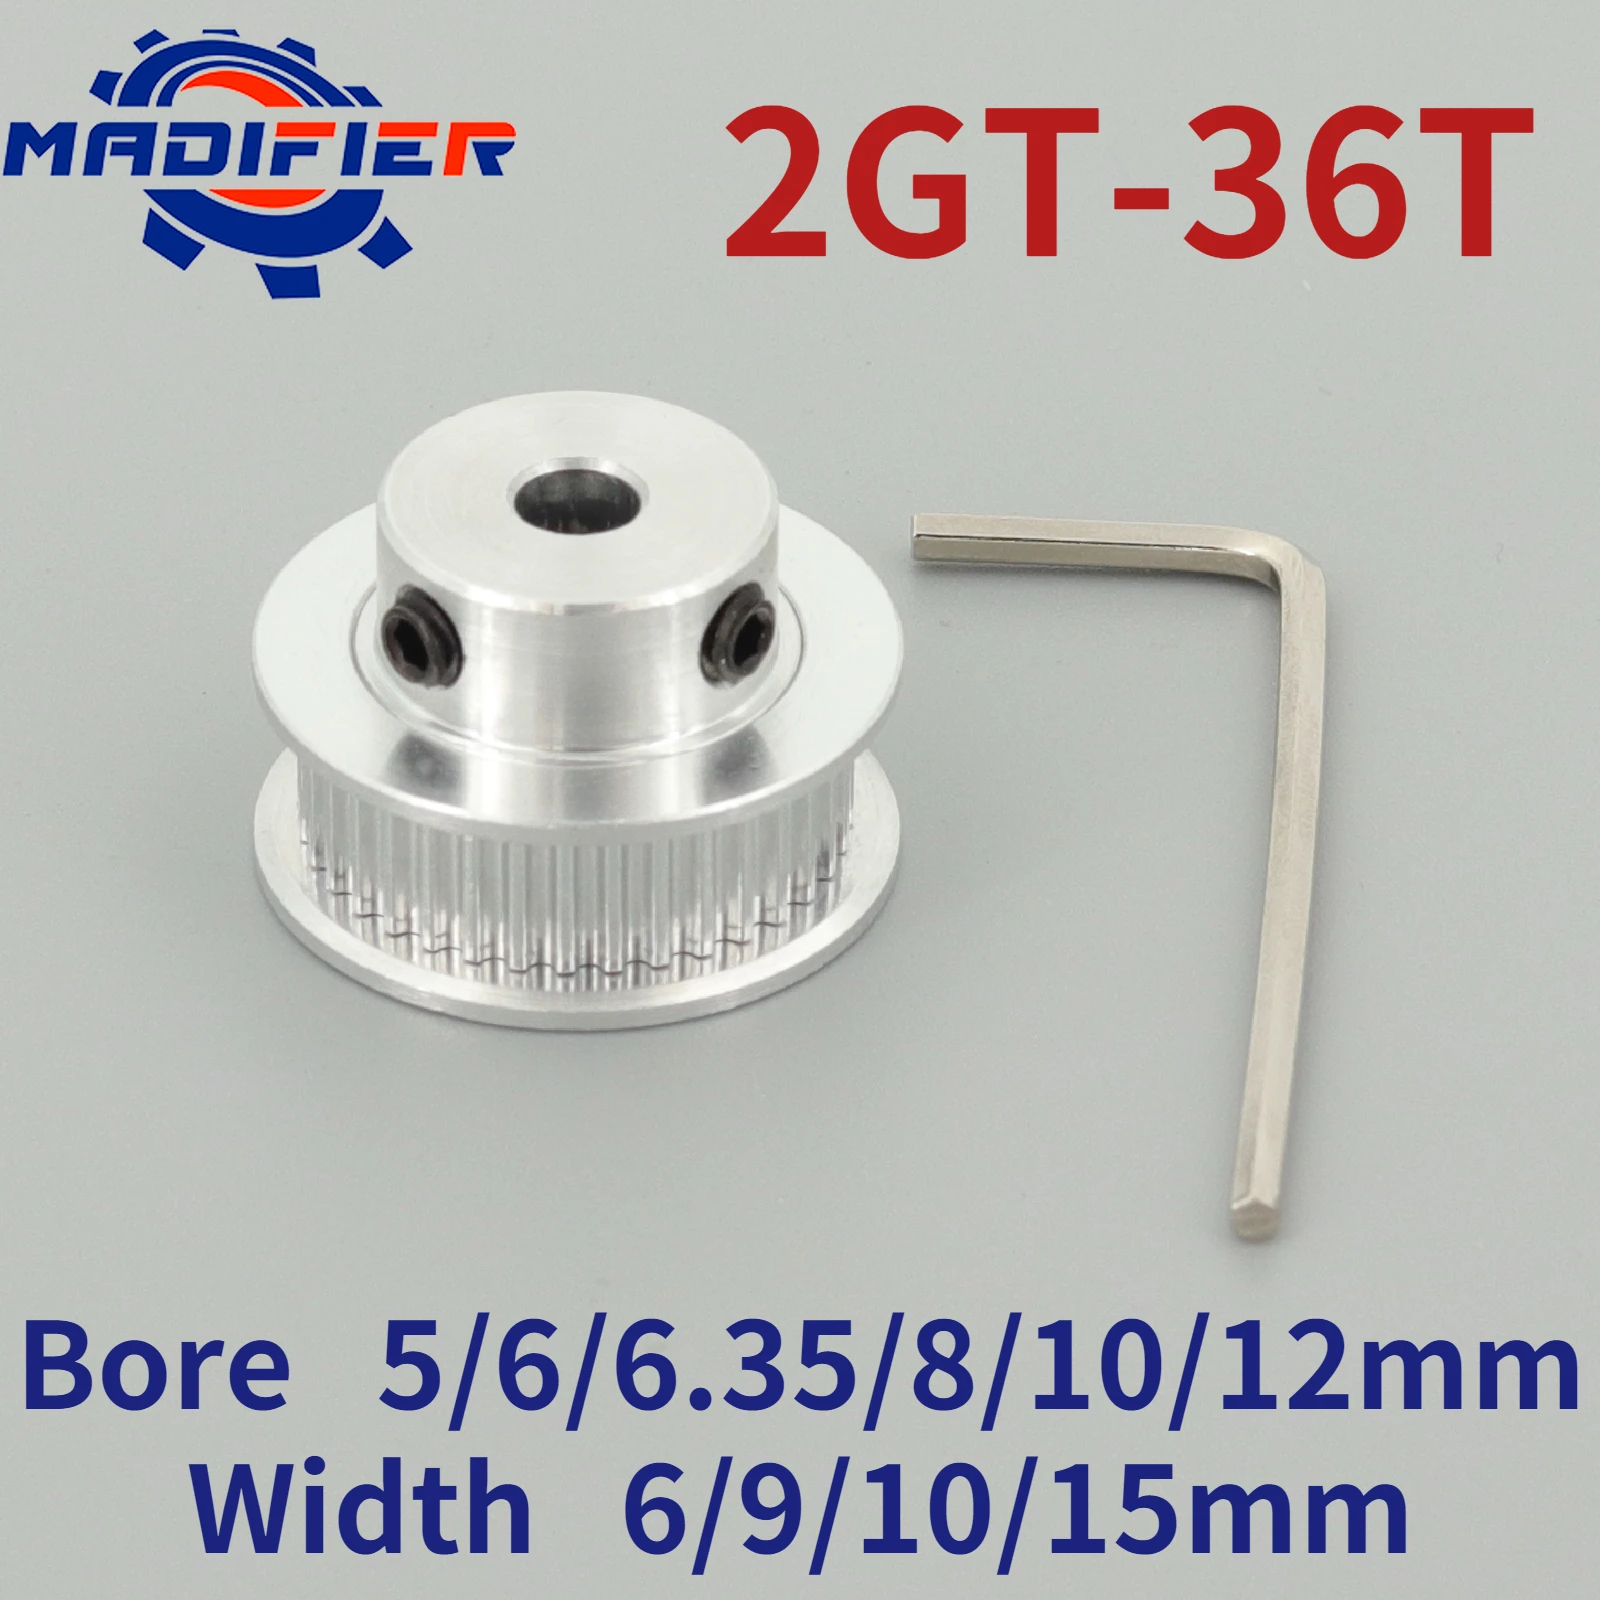 

GKTOOLS GT2 Timing Pulley 2GT 36 Teeth Bore 5/6/6.35/8/10/12mm Synchronous Wheels Width 6/9/10/15mm Belt 3D Printer Parts